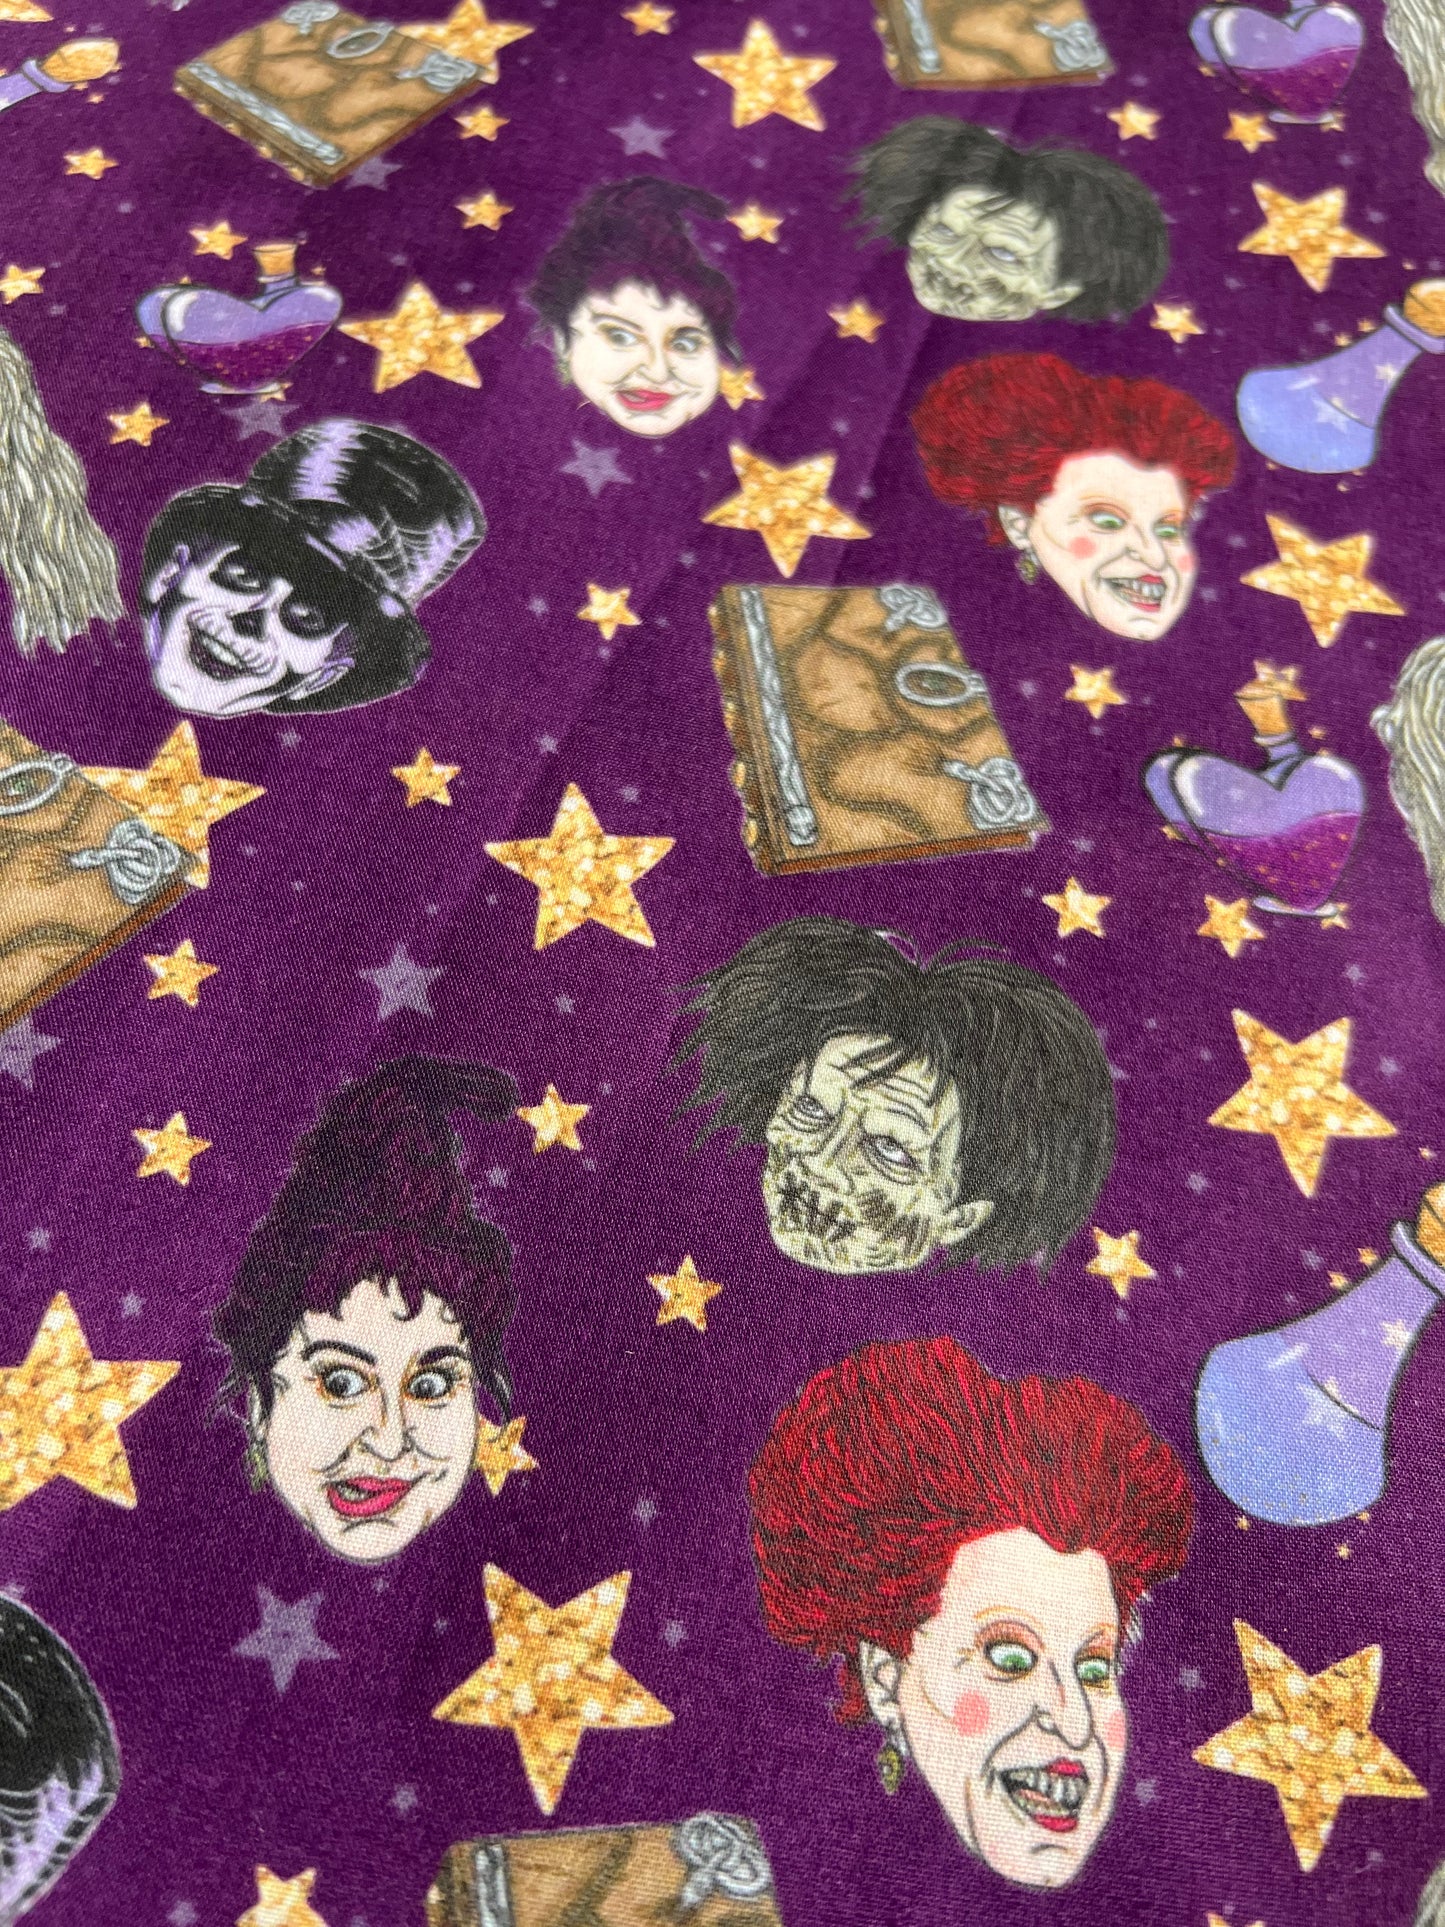 A BUNCH OF HOCUS POCUS - Polycotton Fabric from Japan